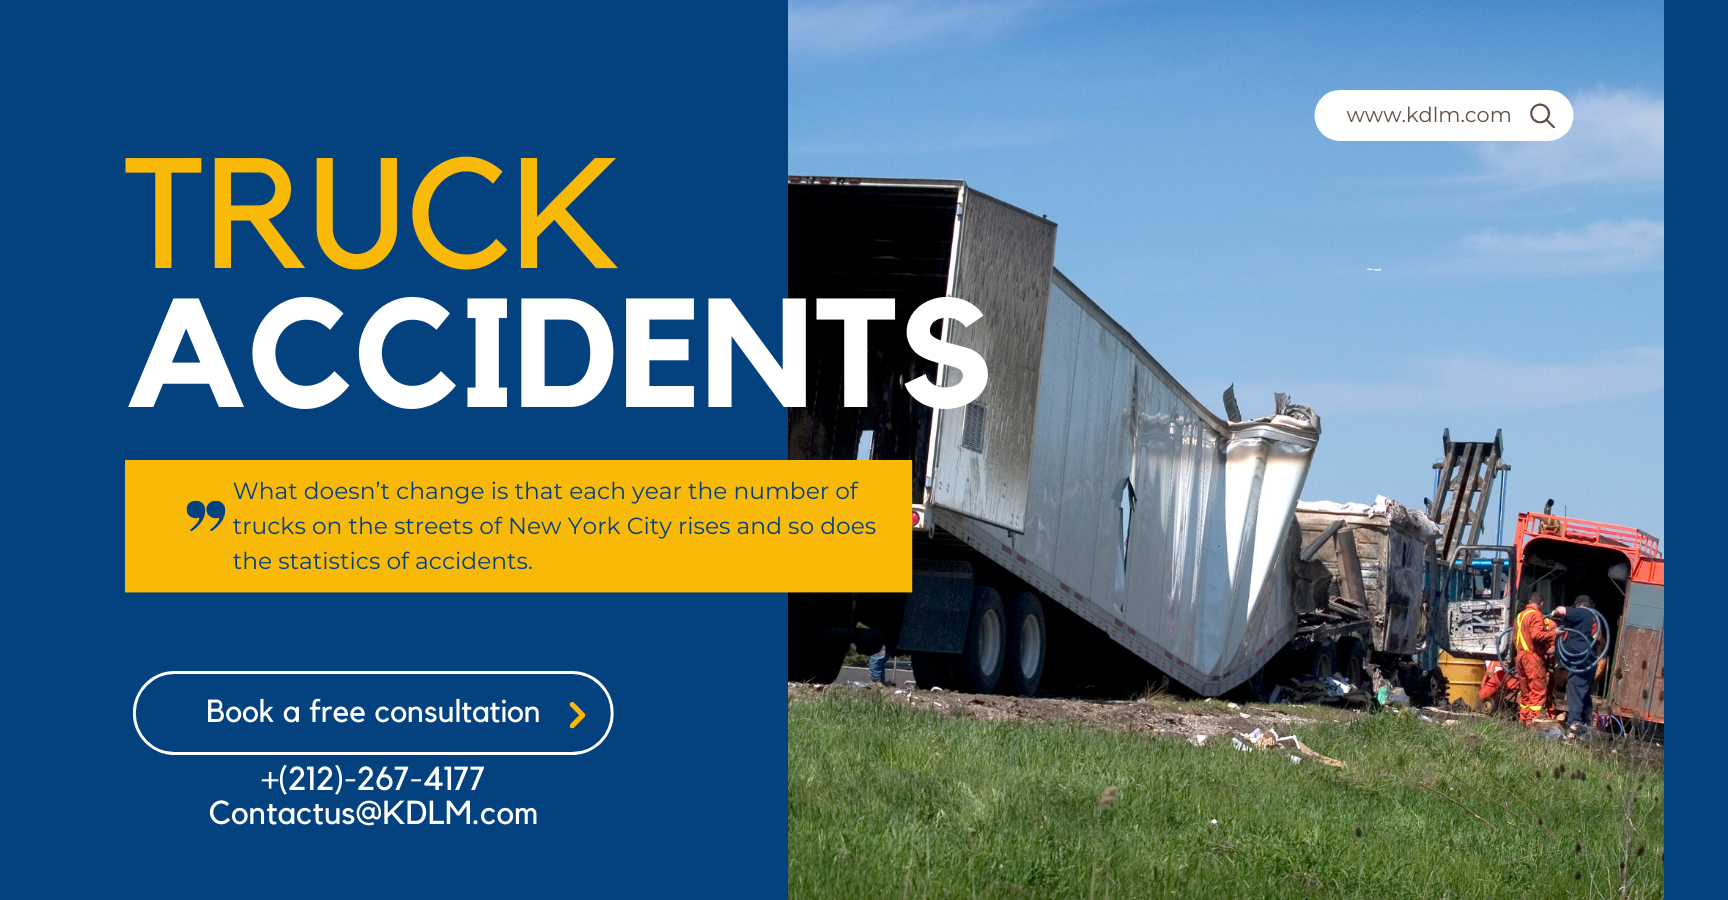 A landing page exclusively focusing on truck accidents.